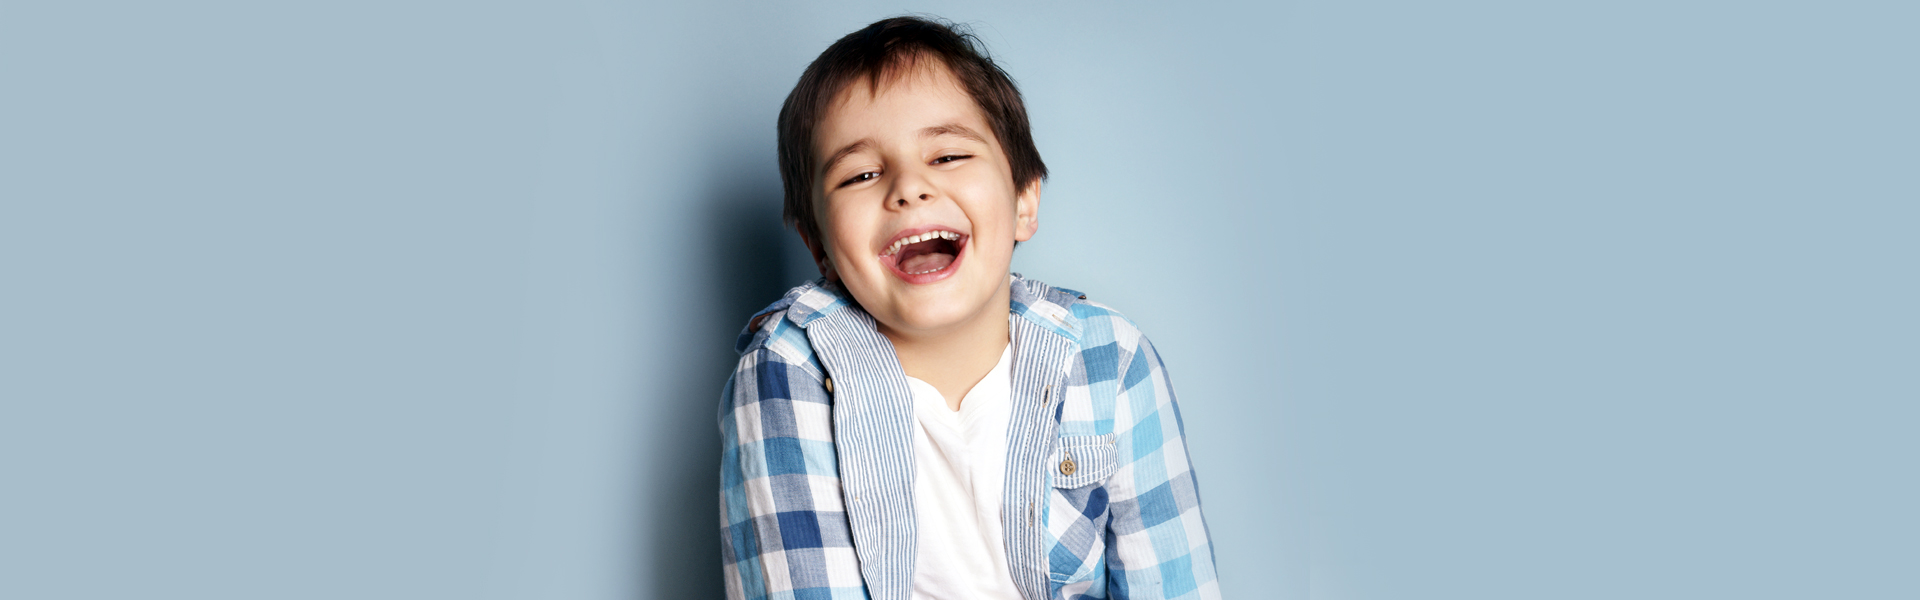 Orthodontic Treatment in Kids 101: All You Need to Know